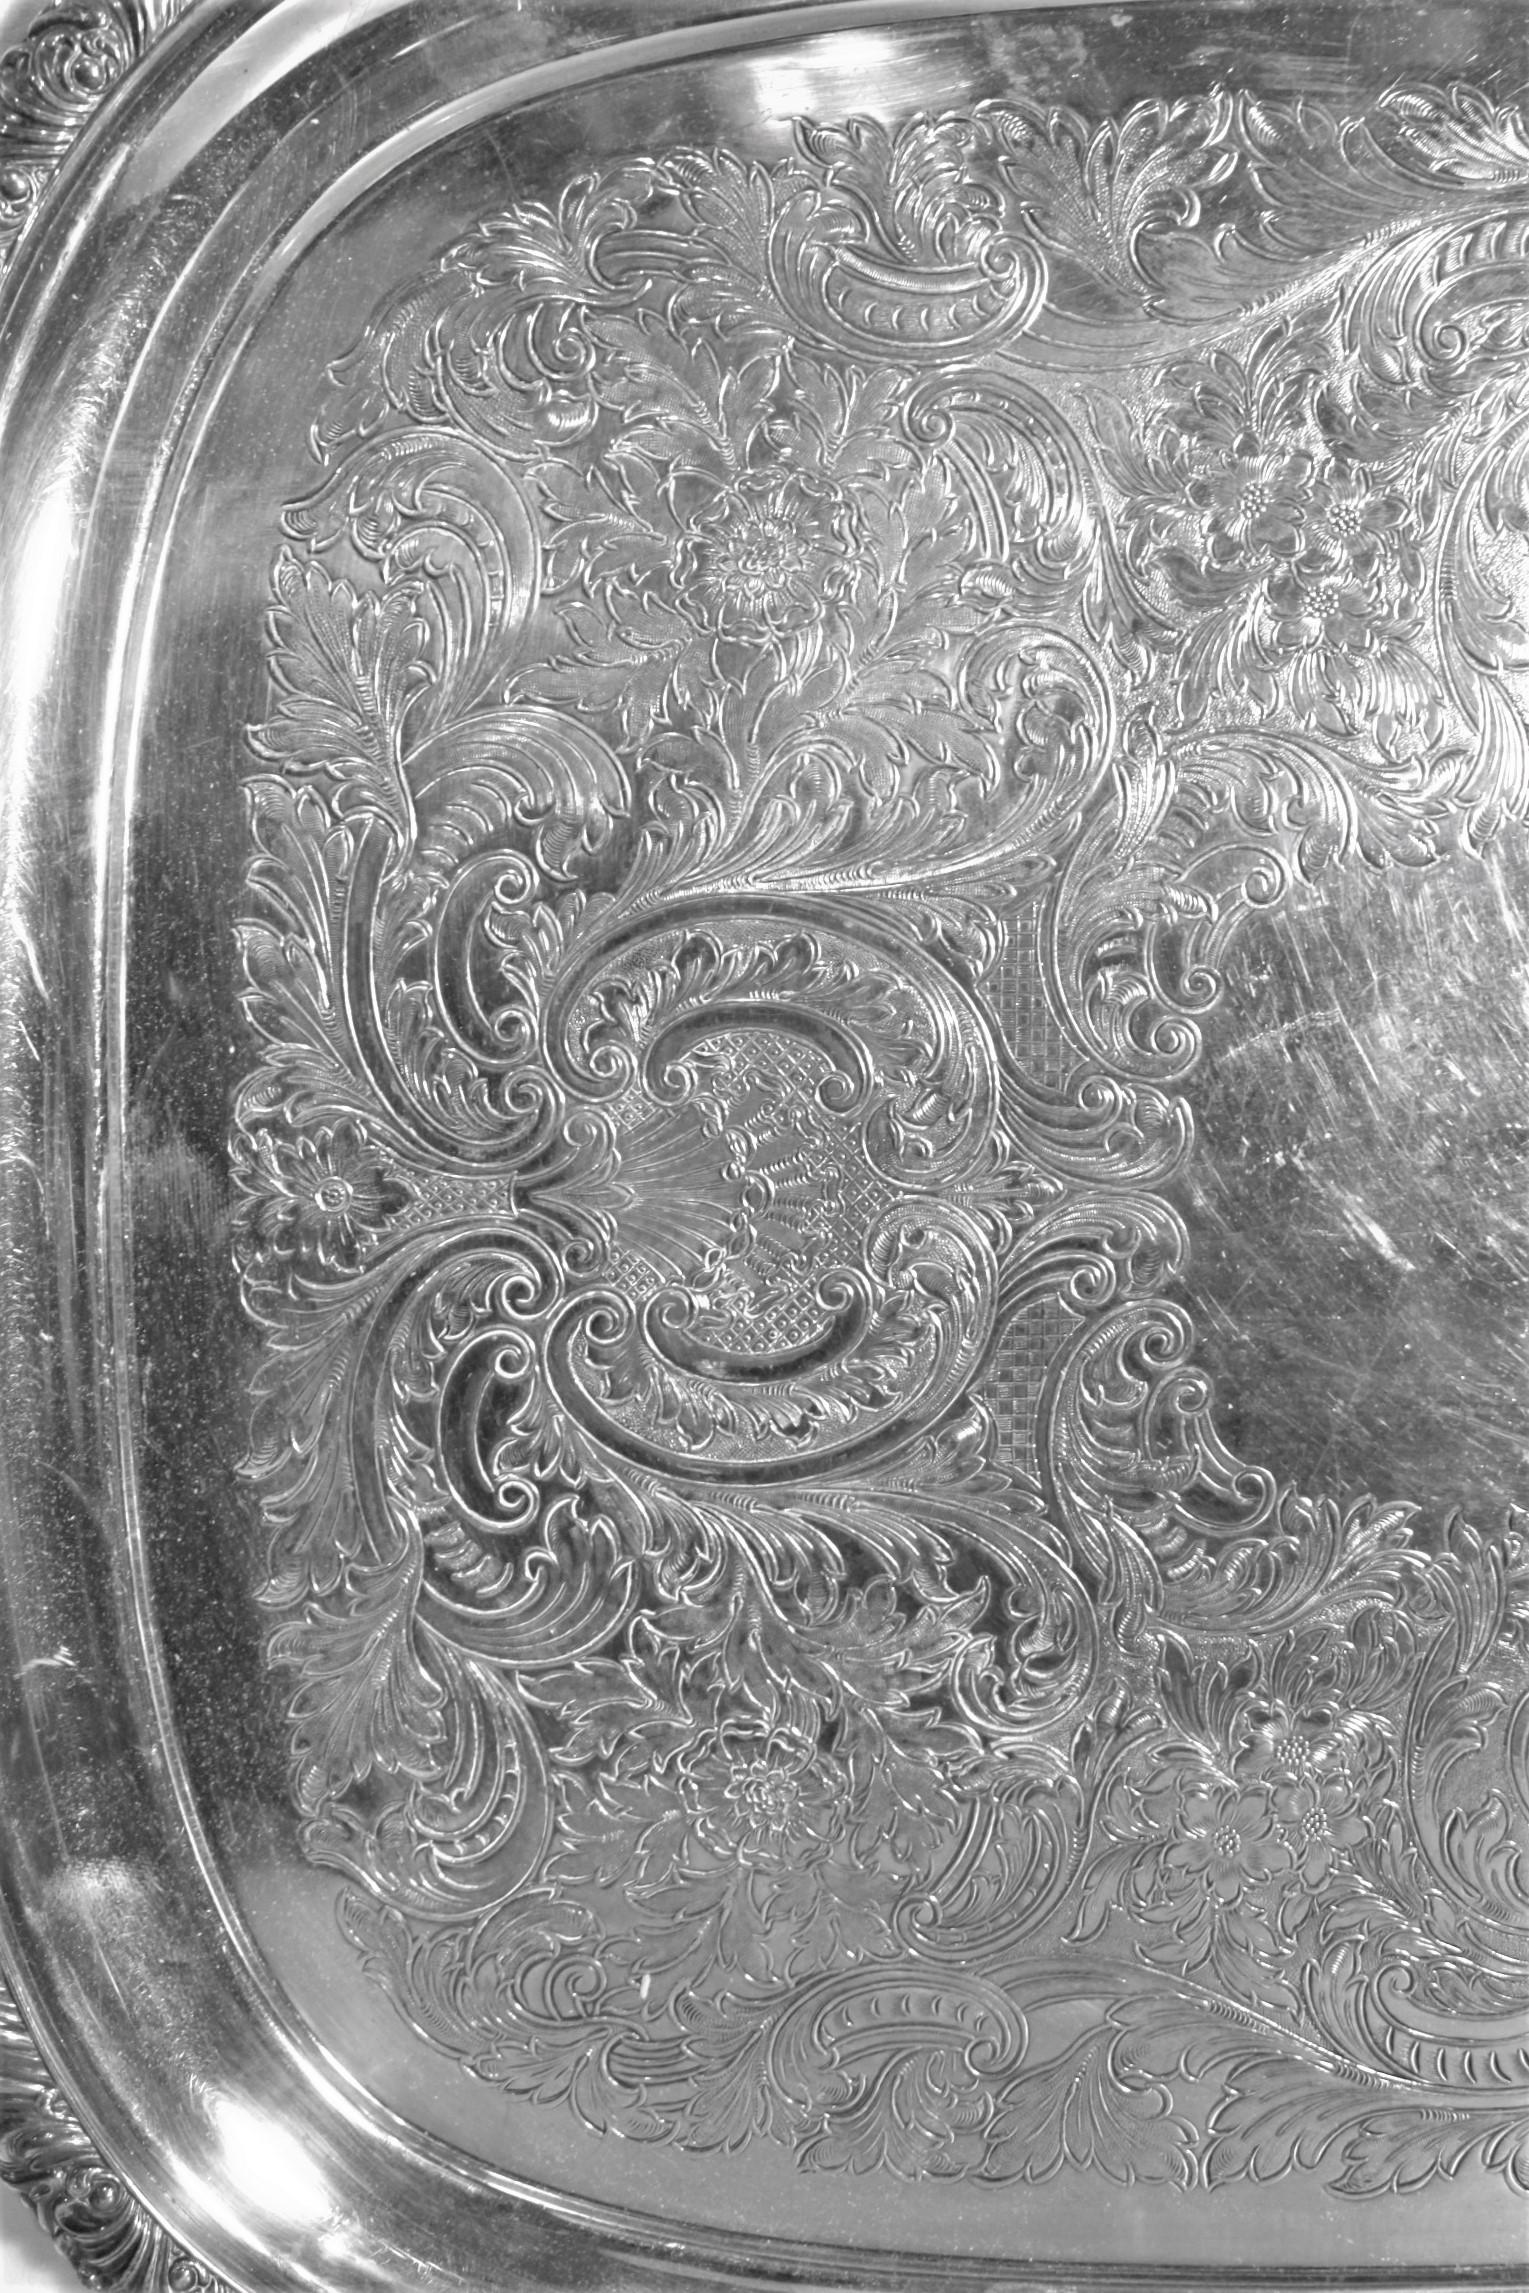 Copper Antique English Silver Plated Serving Tray with Ornate Accents & Engraving For Sale